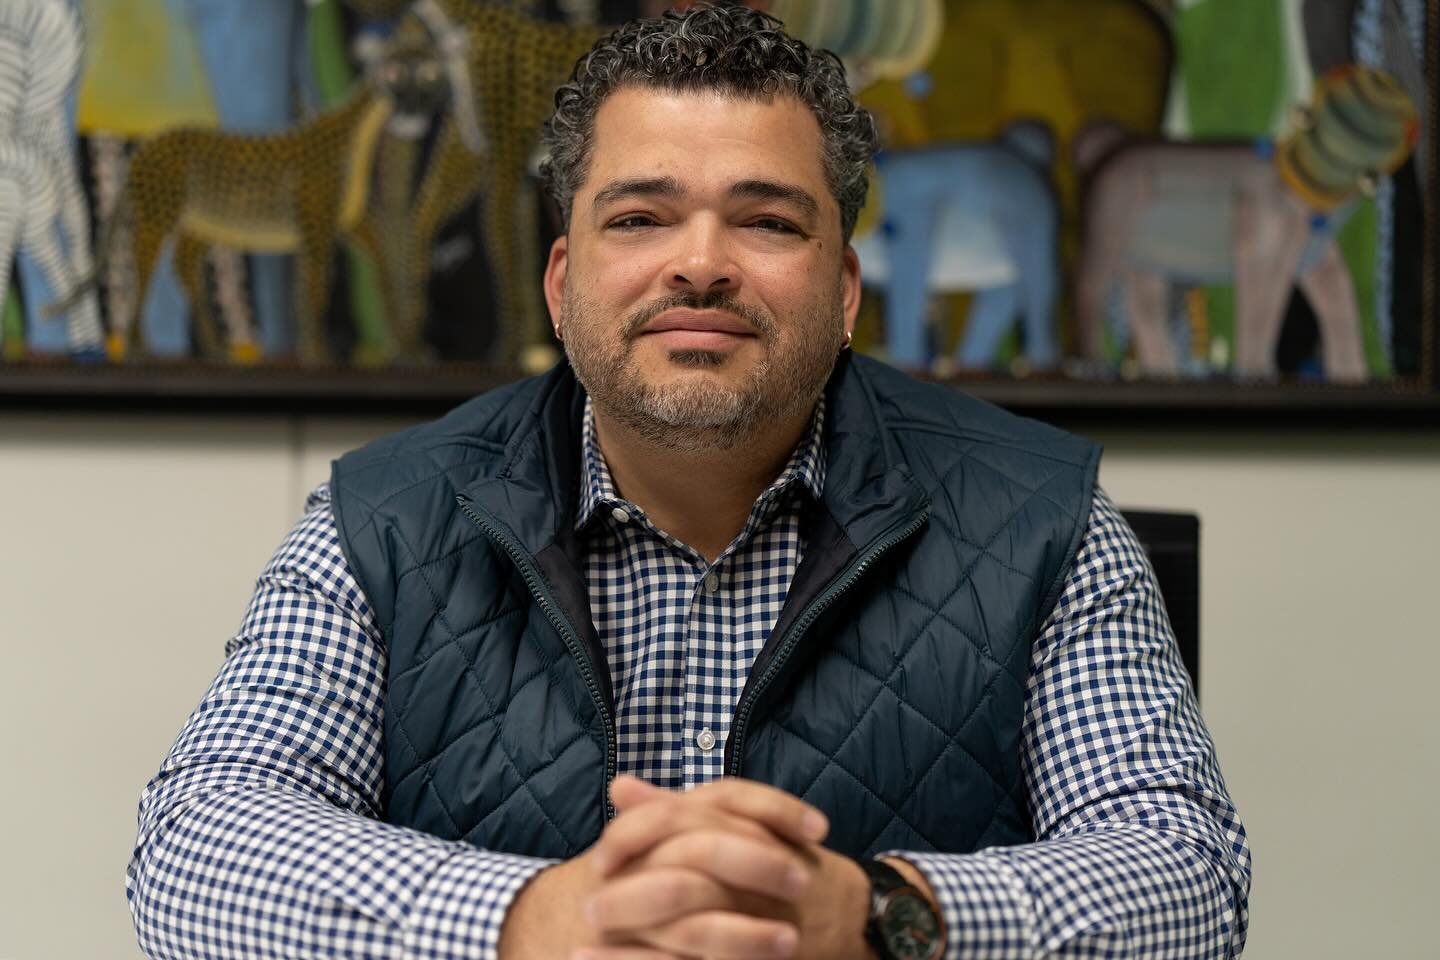 Meet Dr. Chris Brooks, a strong leader and believer in the connections between race faith and economics. As a husband, father and new grandfather hear his vision for a better world for his family #FamilyValues #FutureGen #Legacyinmotion #mnfutureinfo